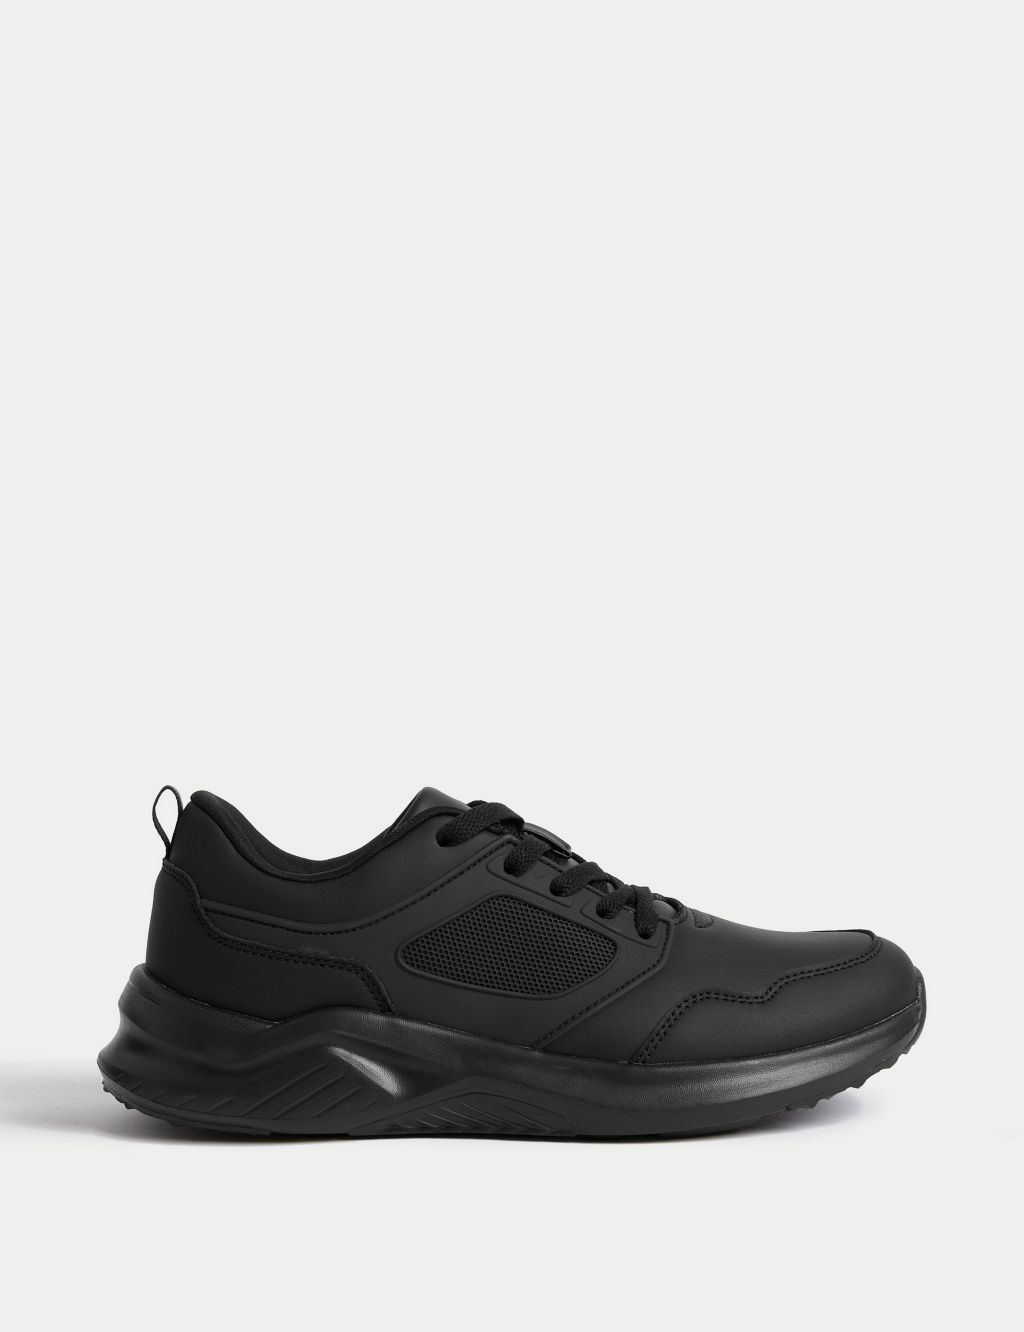 Kids' Spencer Apparel Sneakers - All in Motion Black 6 1 ct